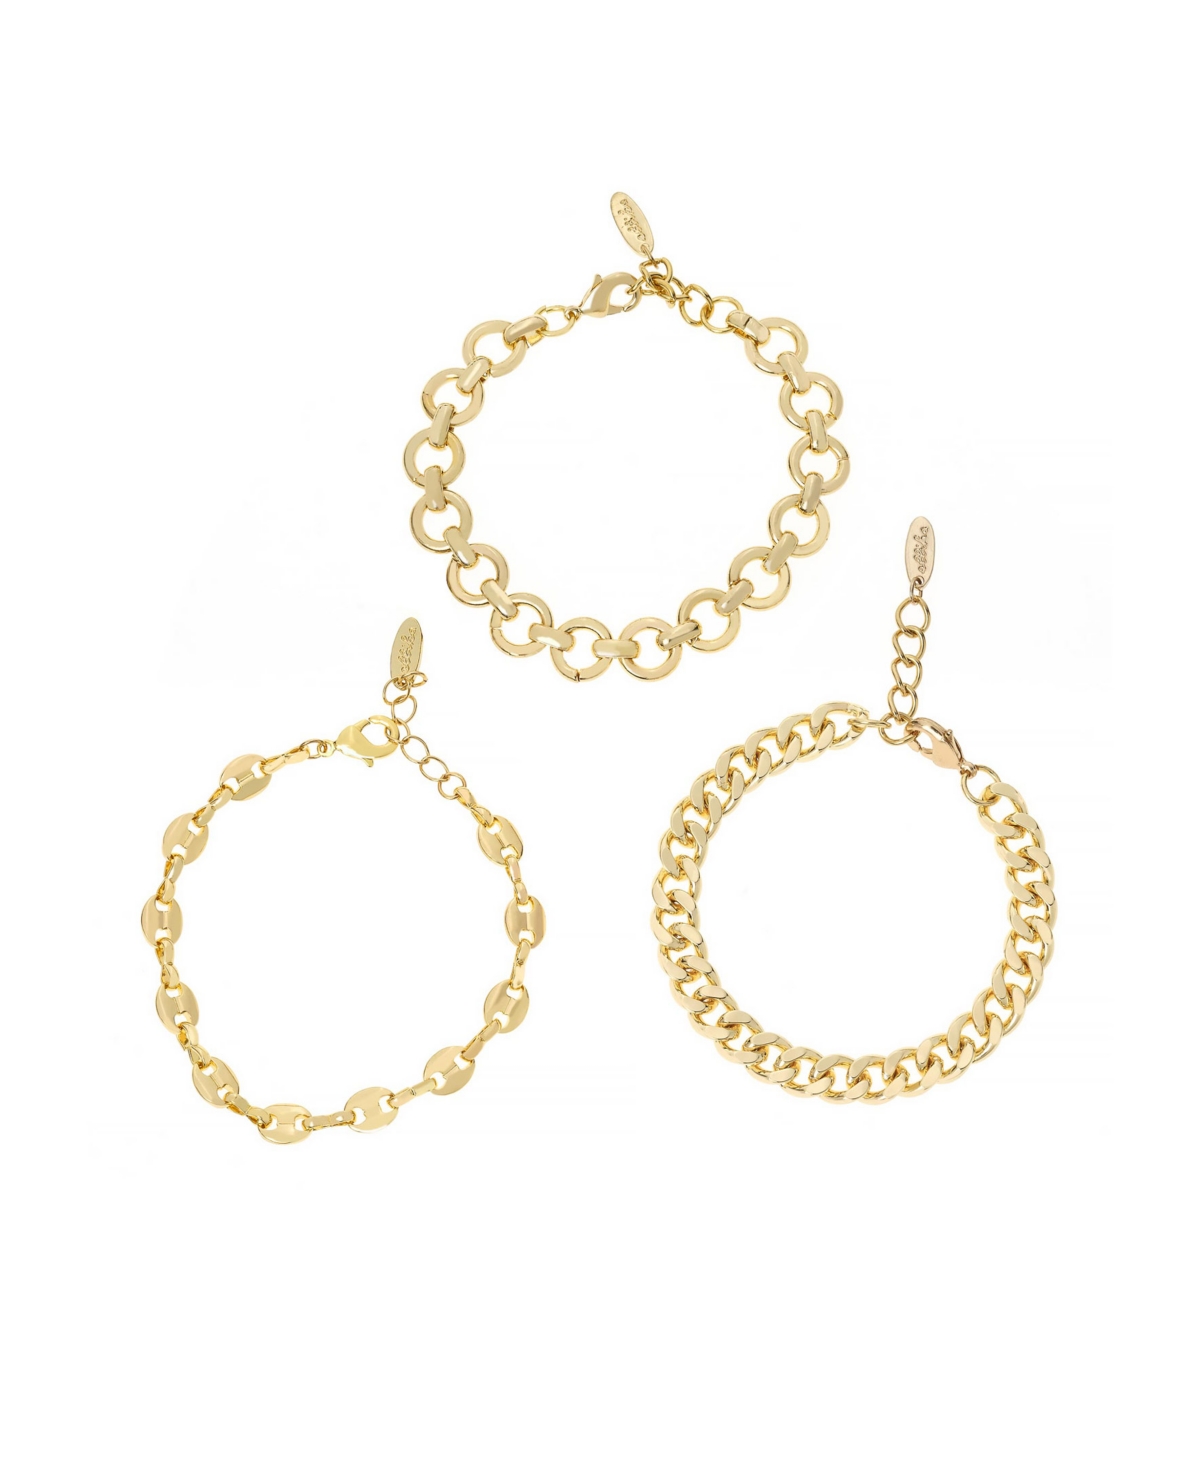 18K Gold Plated Might and Chain Bracelet Set - Gold-Plated